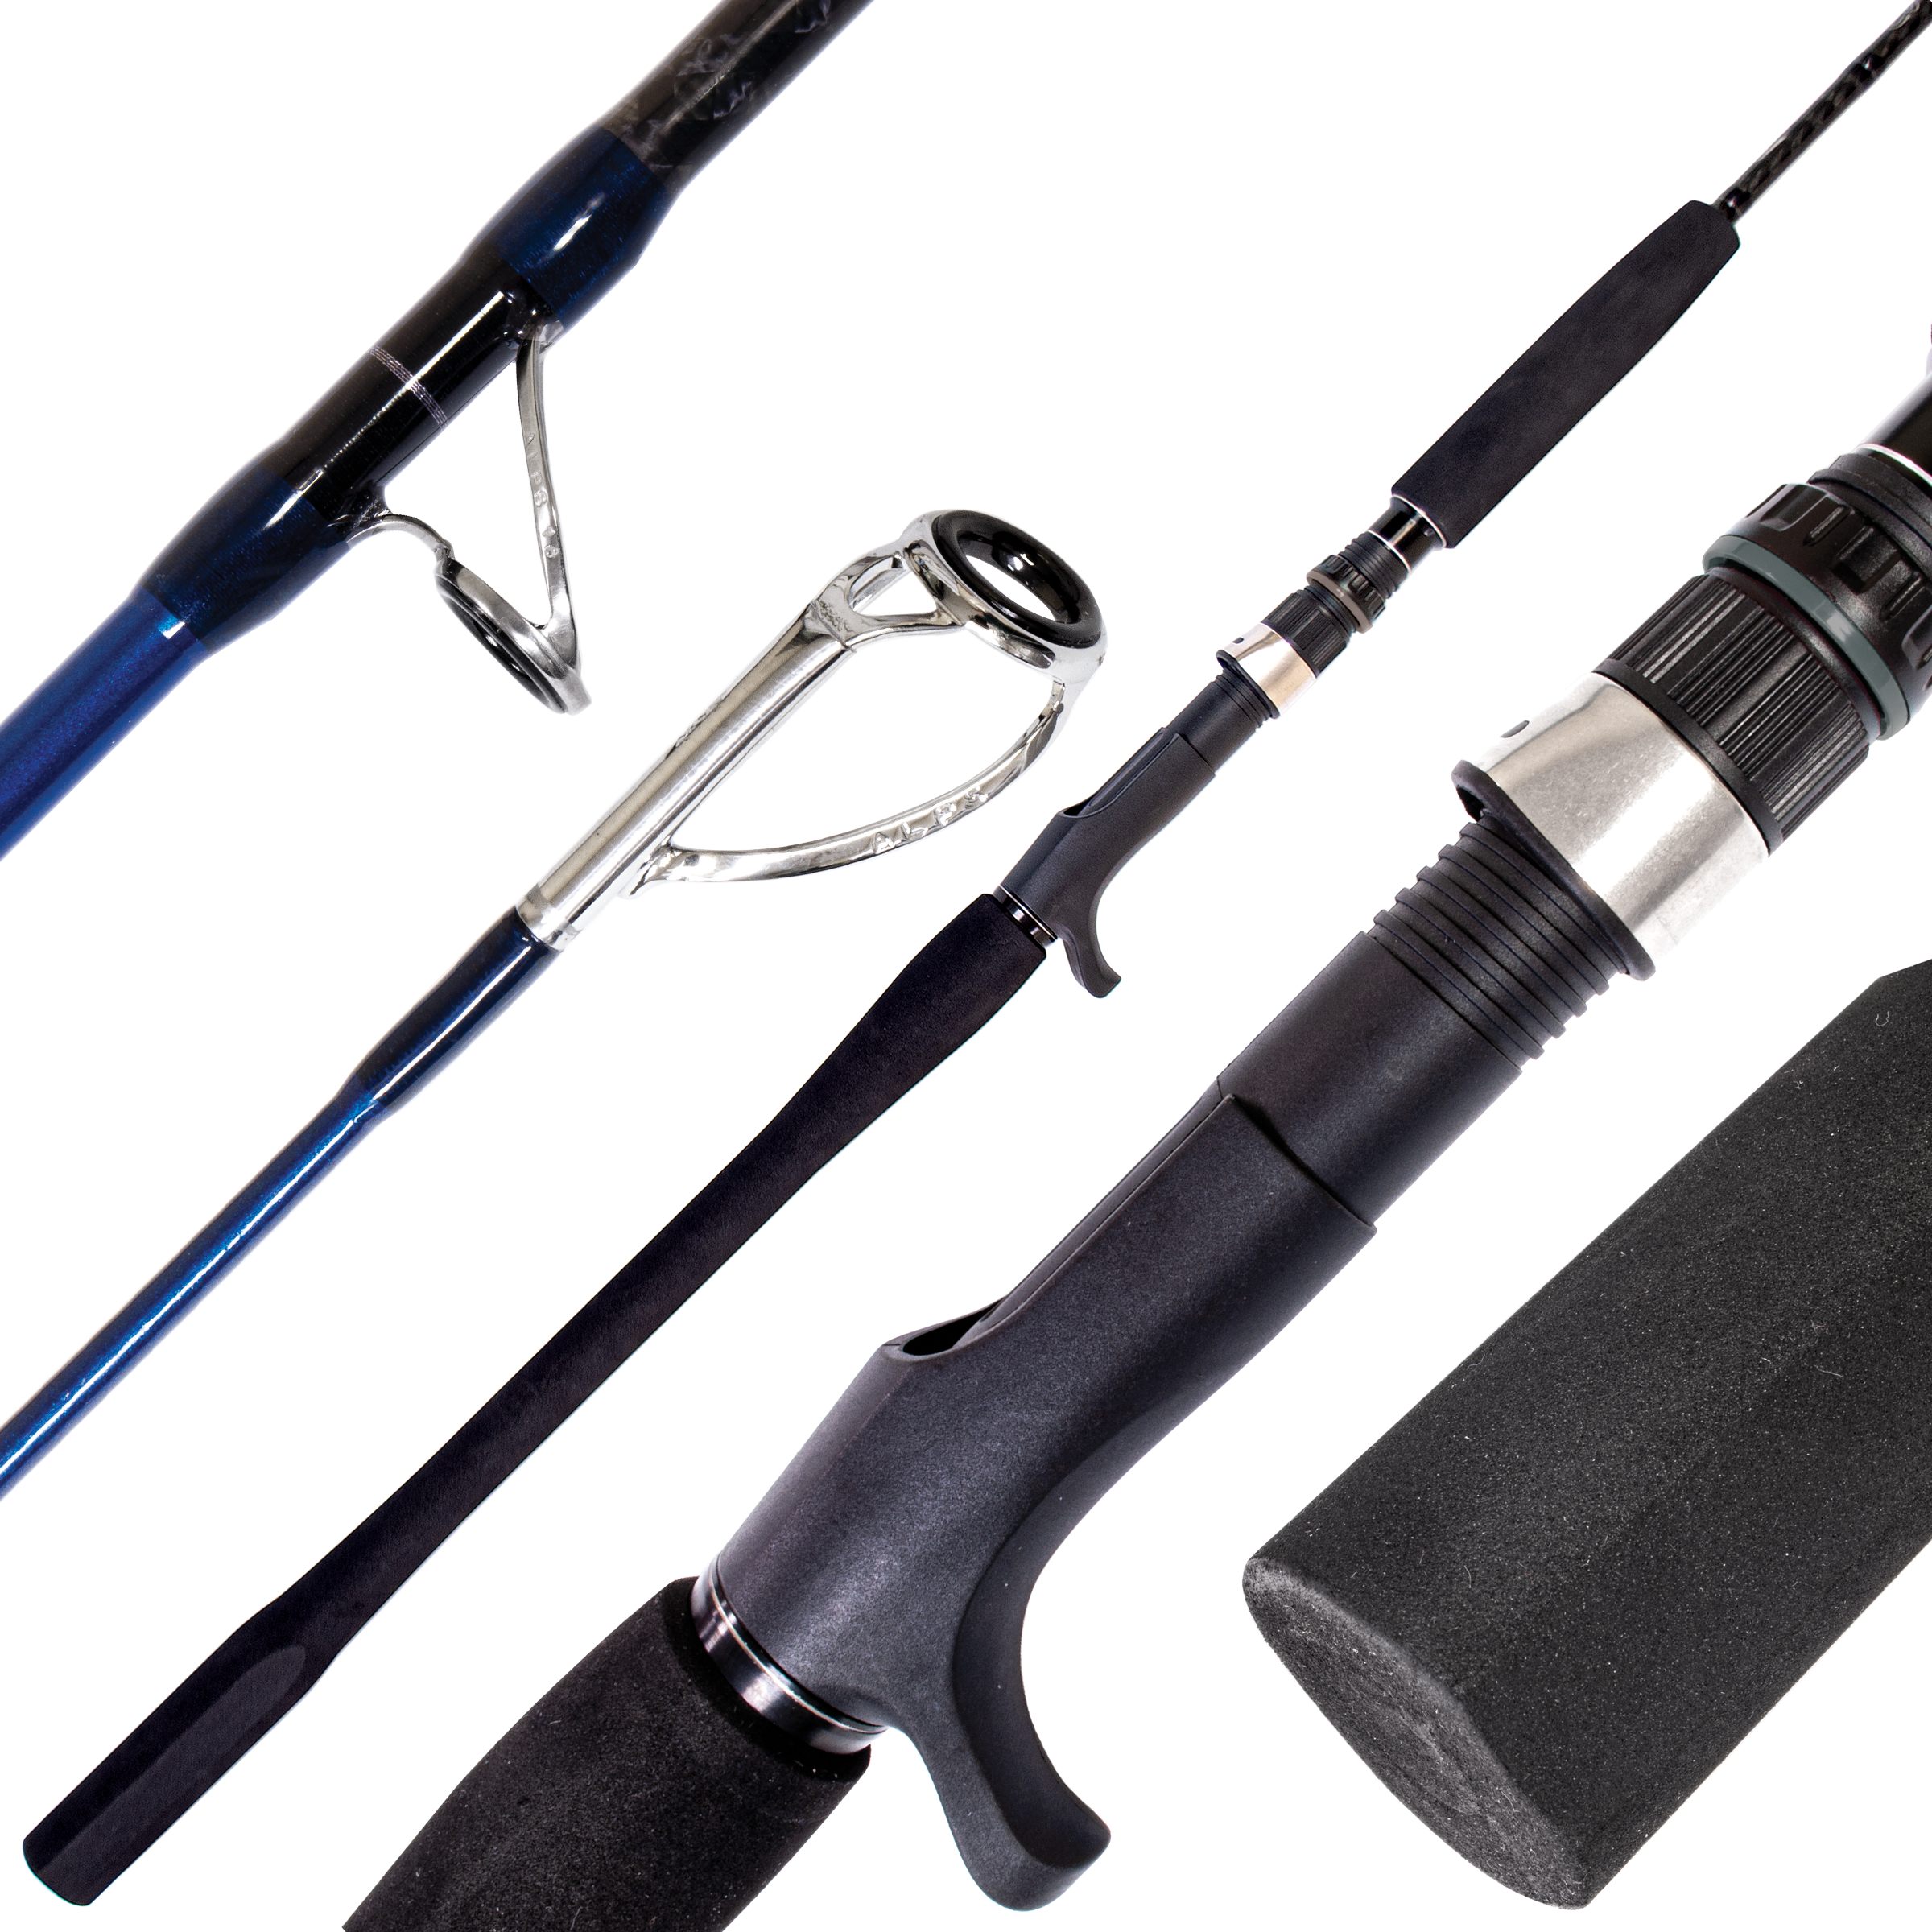 Tsunami Carbon Shield II Slow Pitch Casting Rods – Tackle World